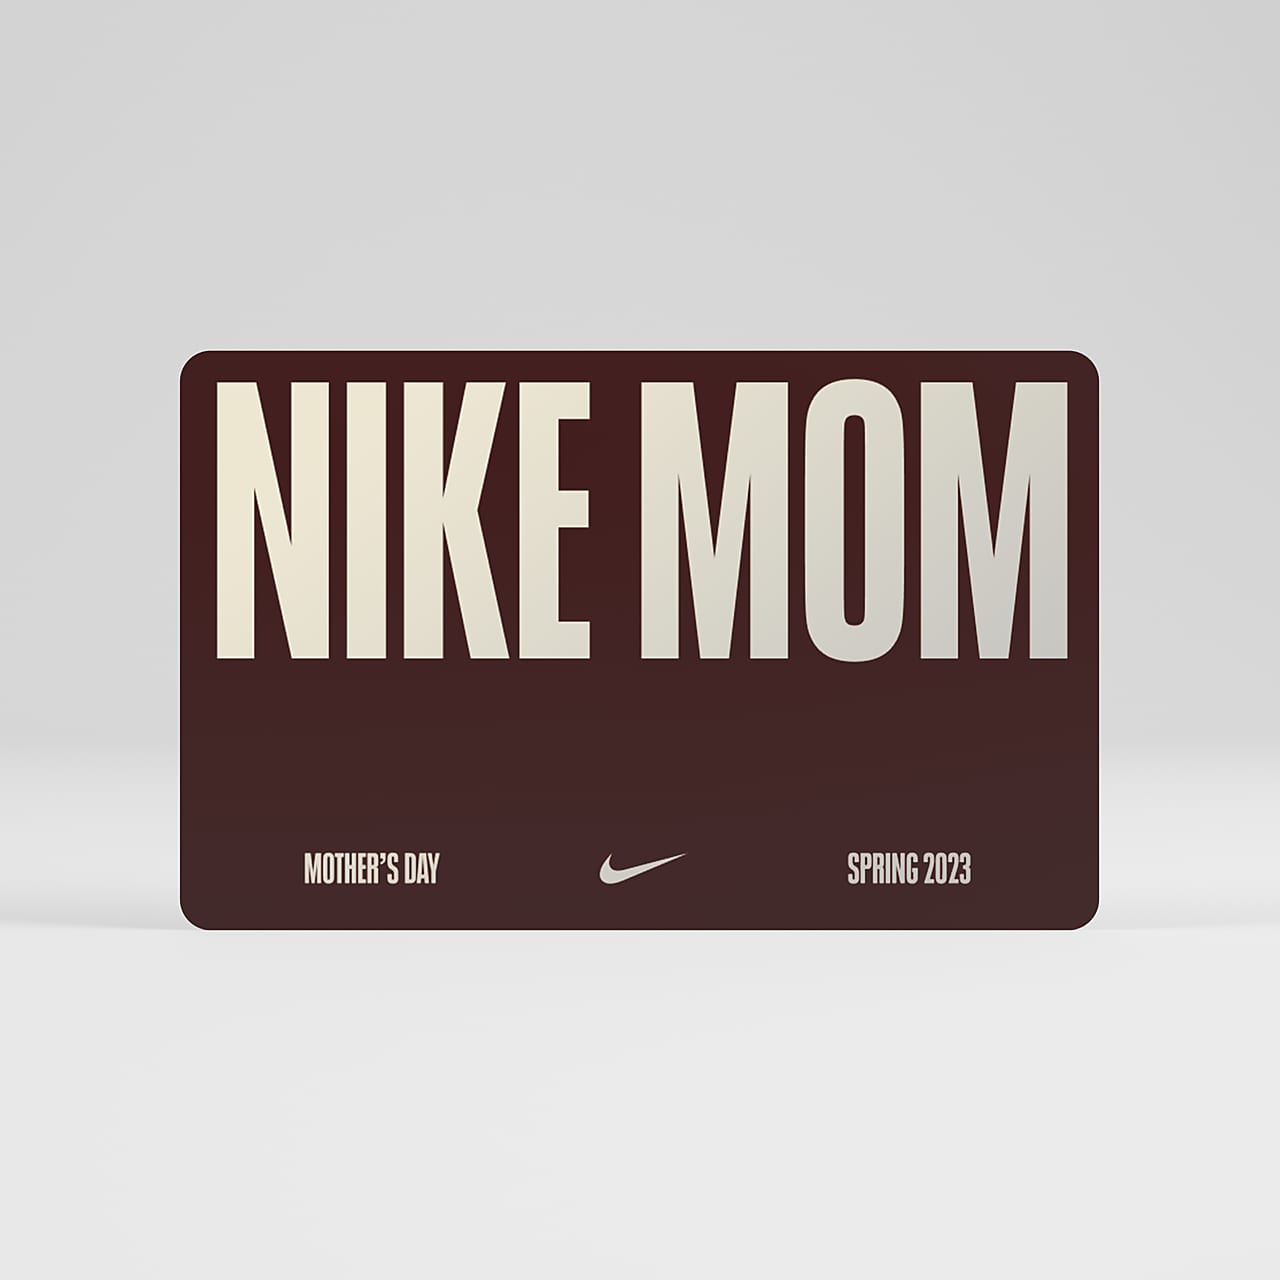 Interpersoonlijk stapel halsband Nike Digital Gift Card Emailed in Approximately 2 Hours or Less. Nike.com